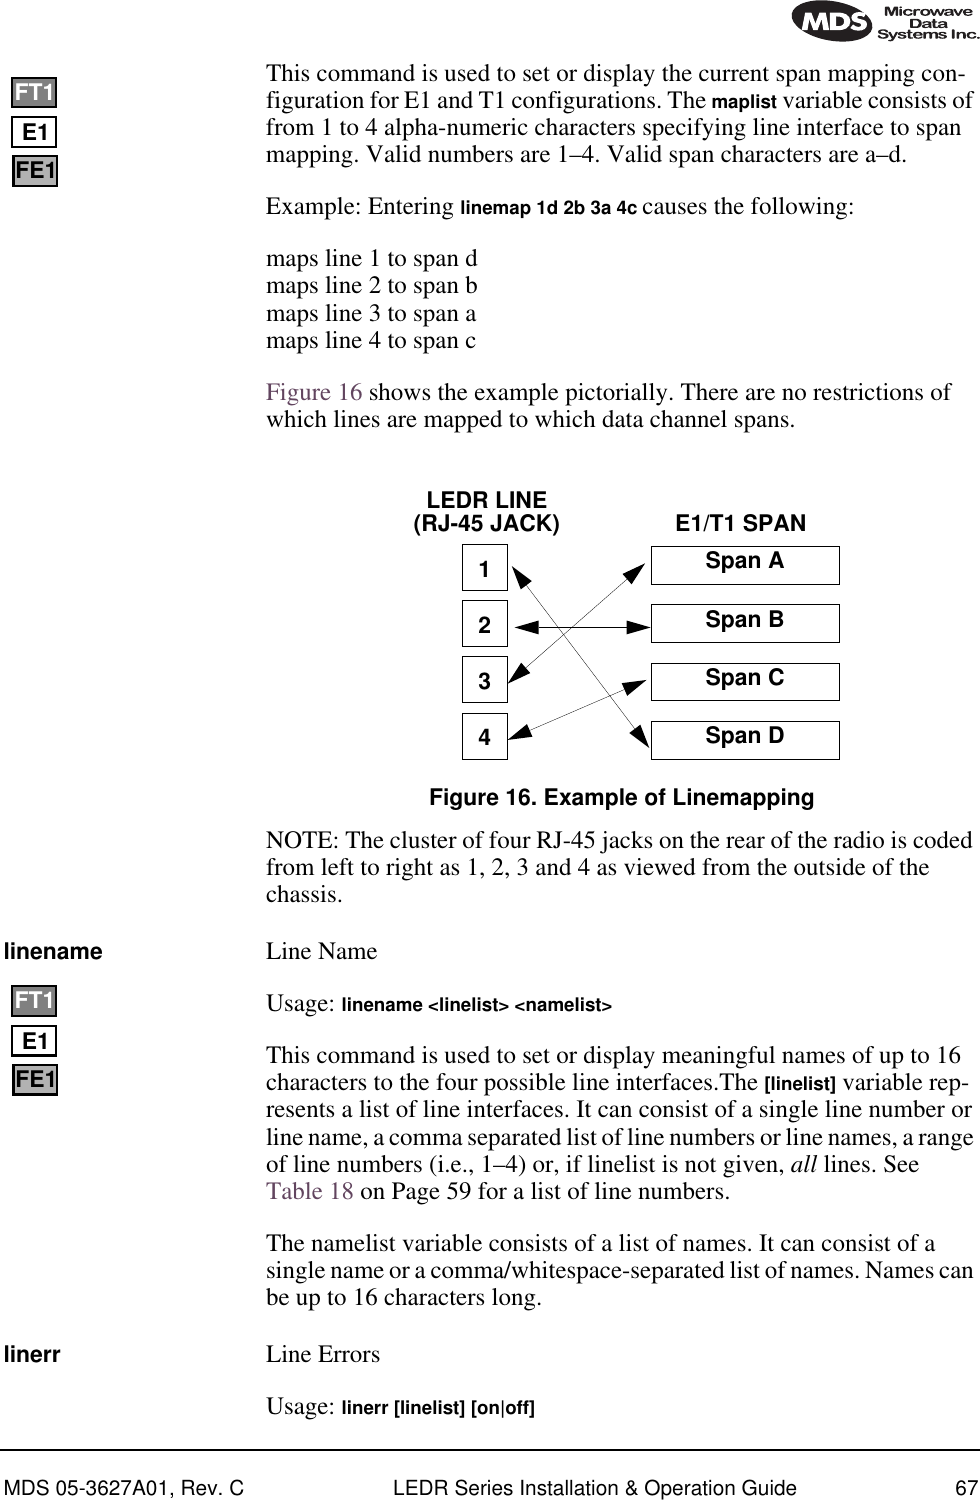 MDS 05-3627A01, Rev. C LEDR Series Installation &amp; Operation Guide 67This command is used to set or display the current span mapping con-figuration for E1 and T1 configurations. The maplist variable consists of from 1 to 4 alpha-numeric characters specifying line interface to span mapping. Valid numbers are 1–4. Valid span characters are a–d.Example: Entering linemap 1d 2b 3a 4c causes the following:maps line 1 to span dmaps line 2 to span bmaps line 3 to span amaps line 4 to span cFigure 16 shows the example pictorially. There are no restrictions of which lines are mapped to which data channel spans.Invisible place holderFigure 16. Example of LinemappingNOTE: The cluster of four RJ-45 jacks on the rear of the radio is coded from left to right as 1, 2, 3 and 4 as viewed from the outside of the chassis.linename Line Name Usage: linename &lt;linelist&gt; &lt;namelist&gt;This command is used to set or display meaningful names of up to 16 characters to the four possible line interfaces.The [linelist] variable rep-resents a list of line interfaces. It can consist of a single line number or line name, a comma separated list of line numbers or line names, a range of line numbers (i.e., 1–4) or, if linelist is not given, all lines. See Table 18 on Page 59 for a list of line numbers.The namelist variable consists of a list of names. It can consist of a single name or a comma/whitespace-separated list of names. Names can be up to 16 characters long.linerr Line ErrorsUsage: linerr [linelist] [on|off]E1FT1FE13421Span ASpan BSpan CSpan DLEDR LINE E1/T1 SPAN(RJ-45 JACK)E1FT1FE1